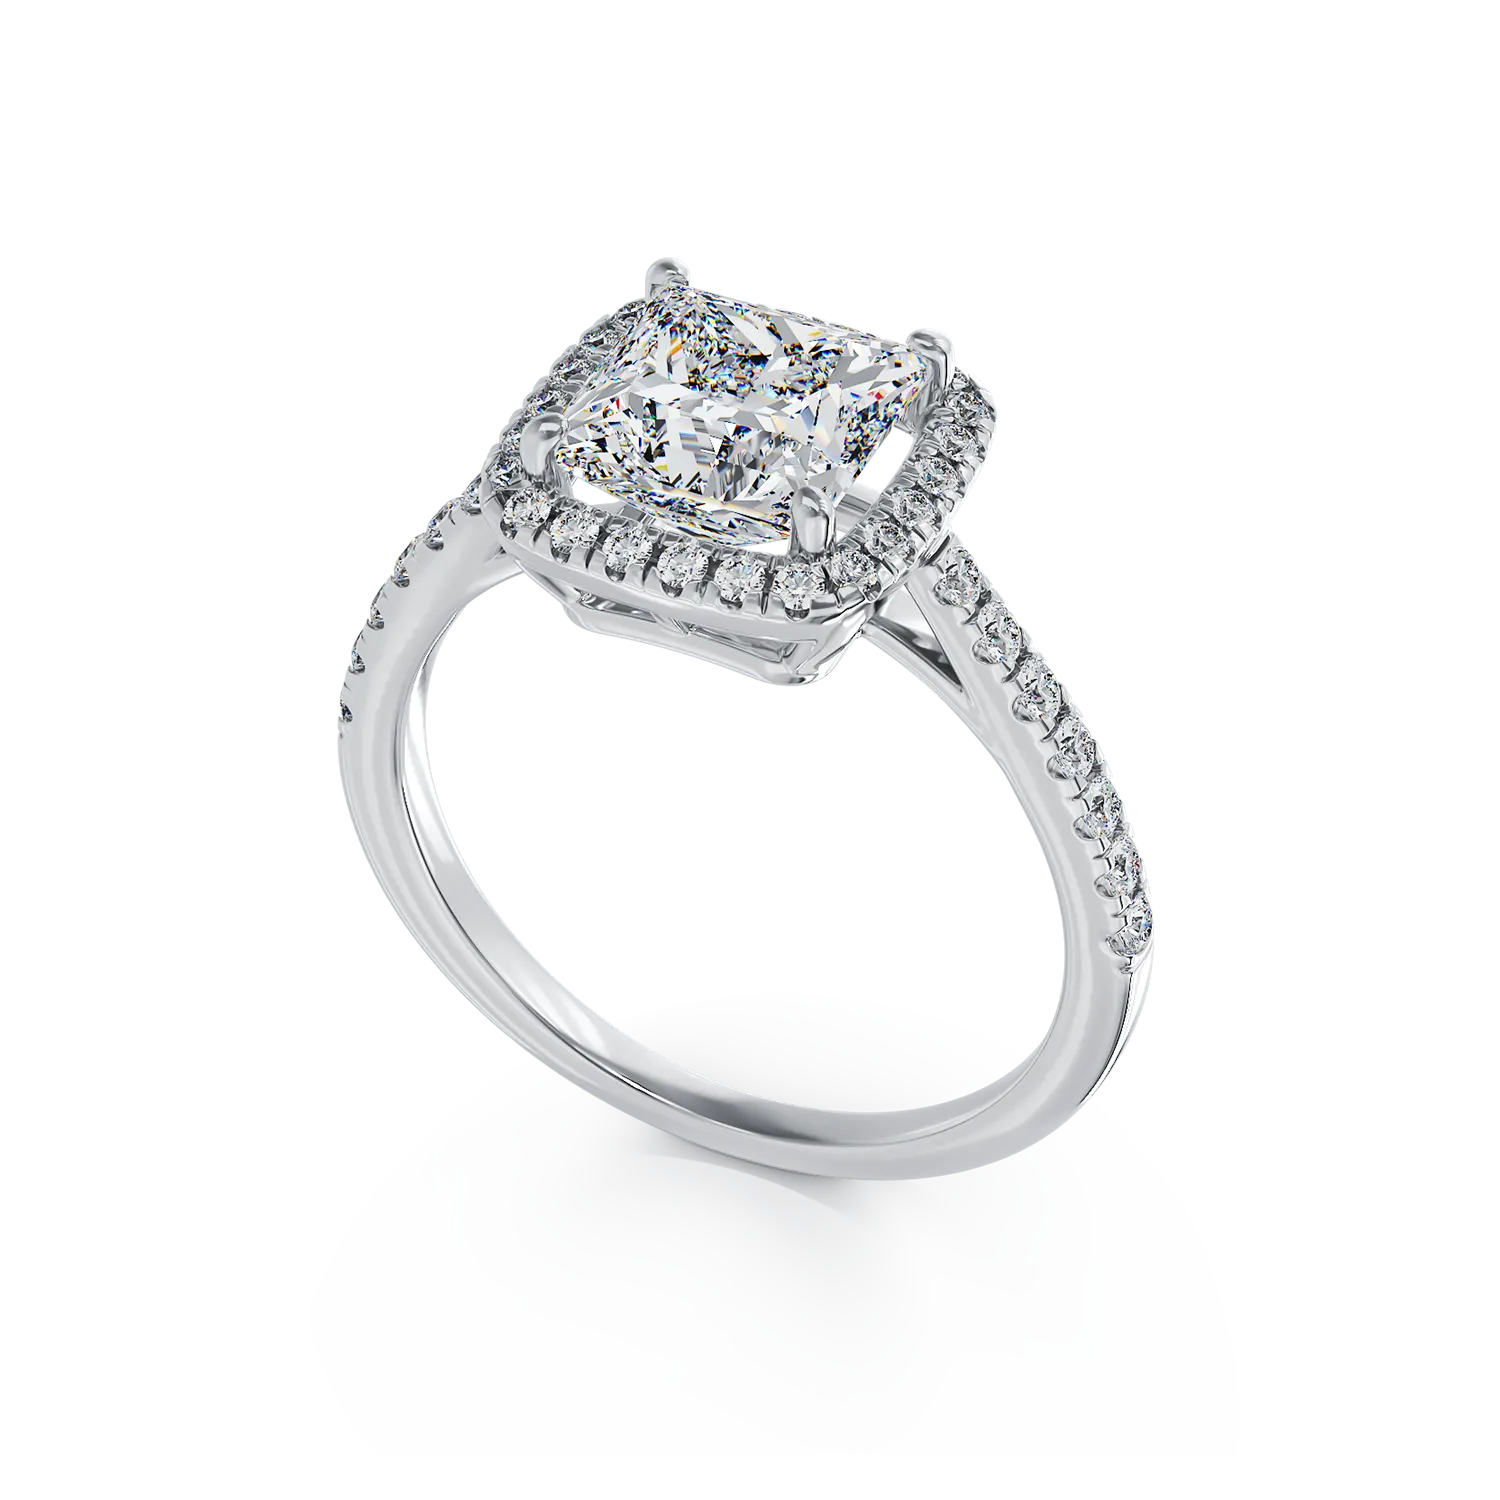 18K white gold engagement ring with 2.02ct diamond and 0.37ct diamonds